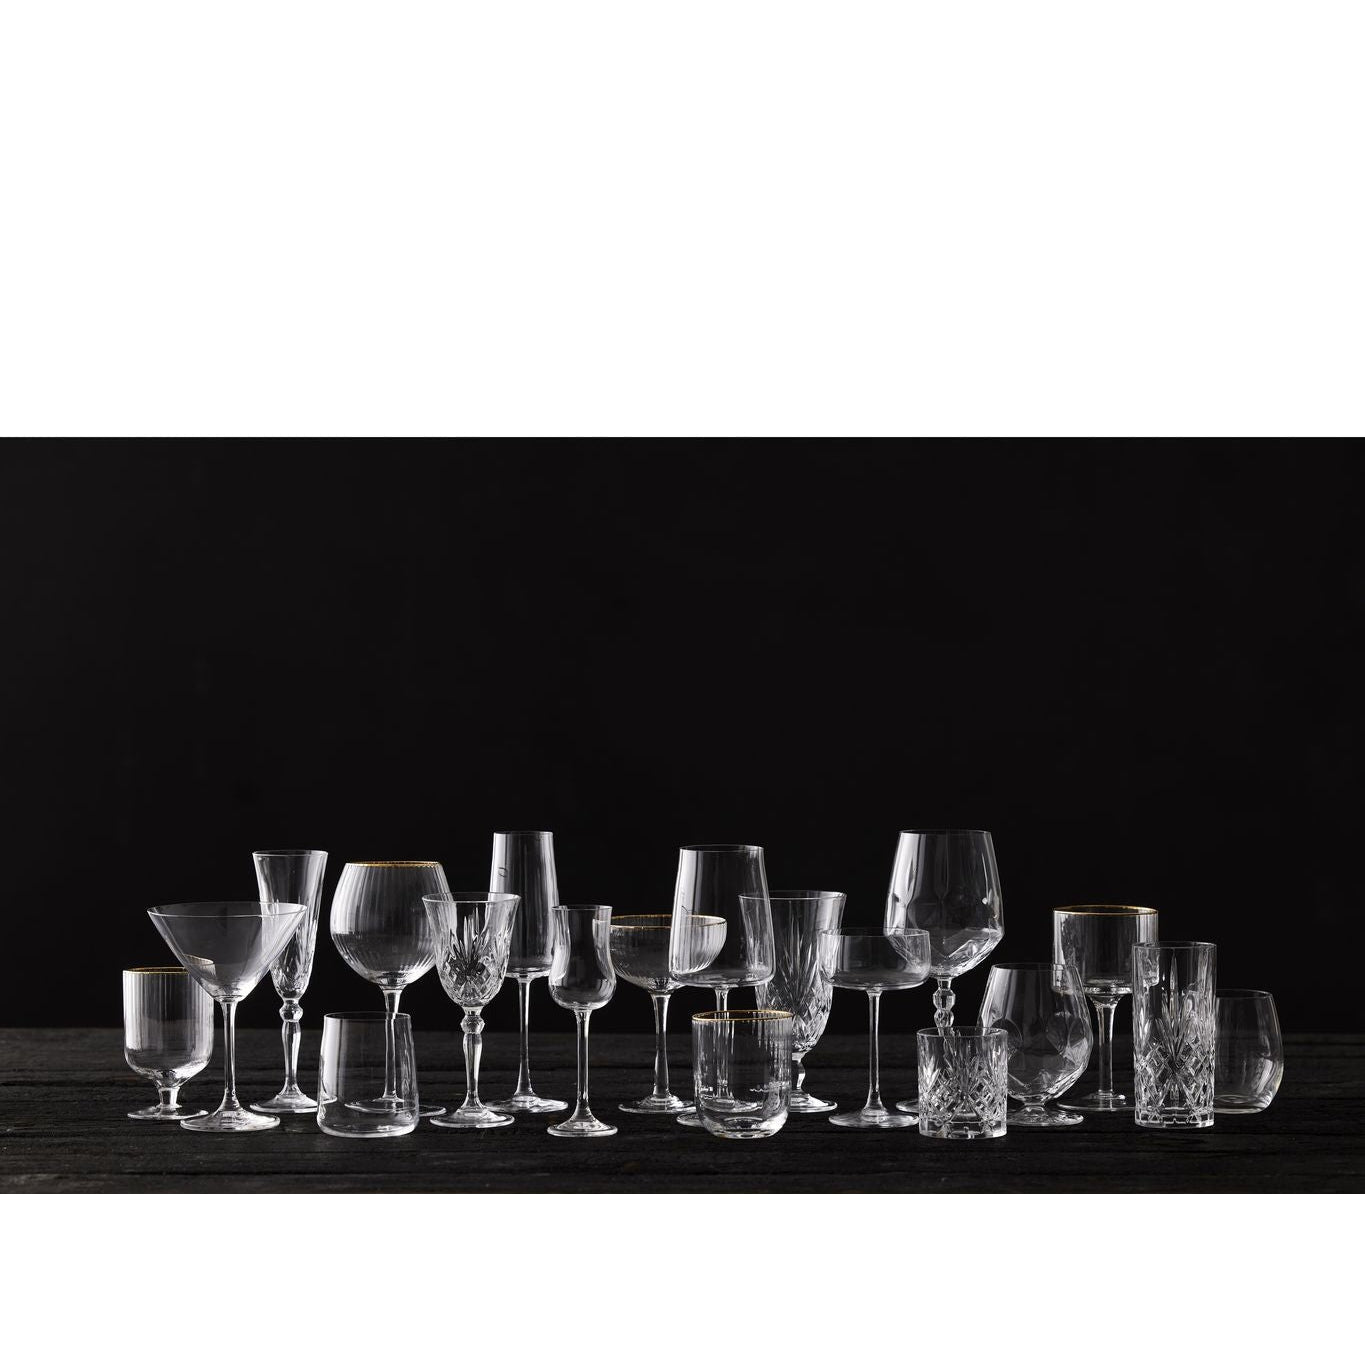 Lyngby Glas Palermo Gold Wine Verre 30 CL, 4 PCS.